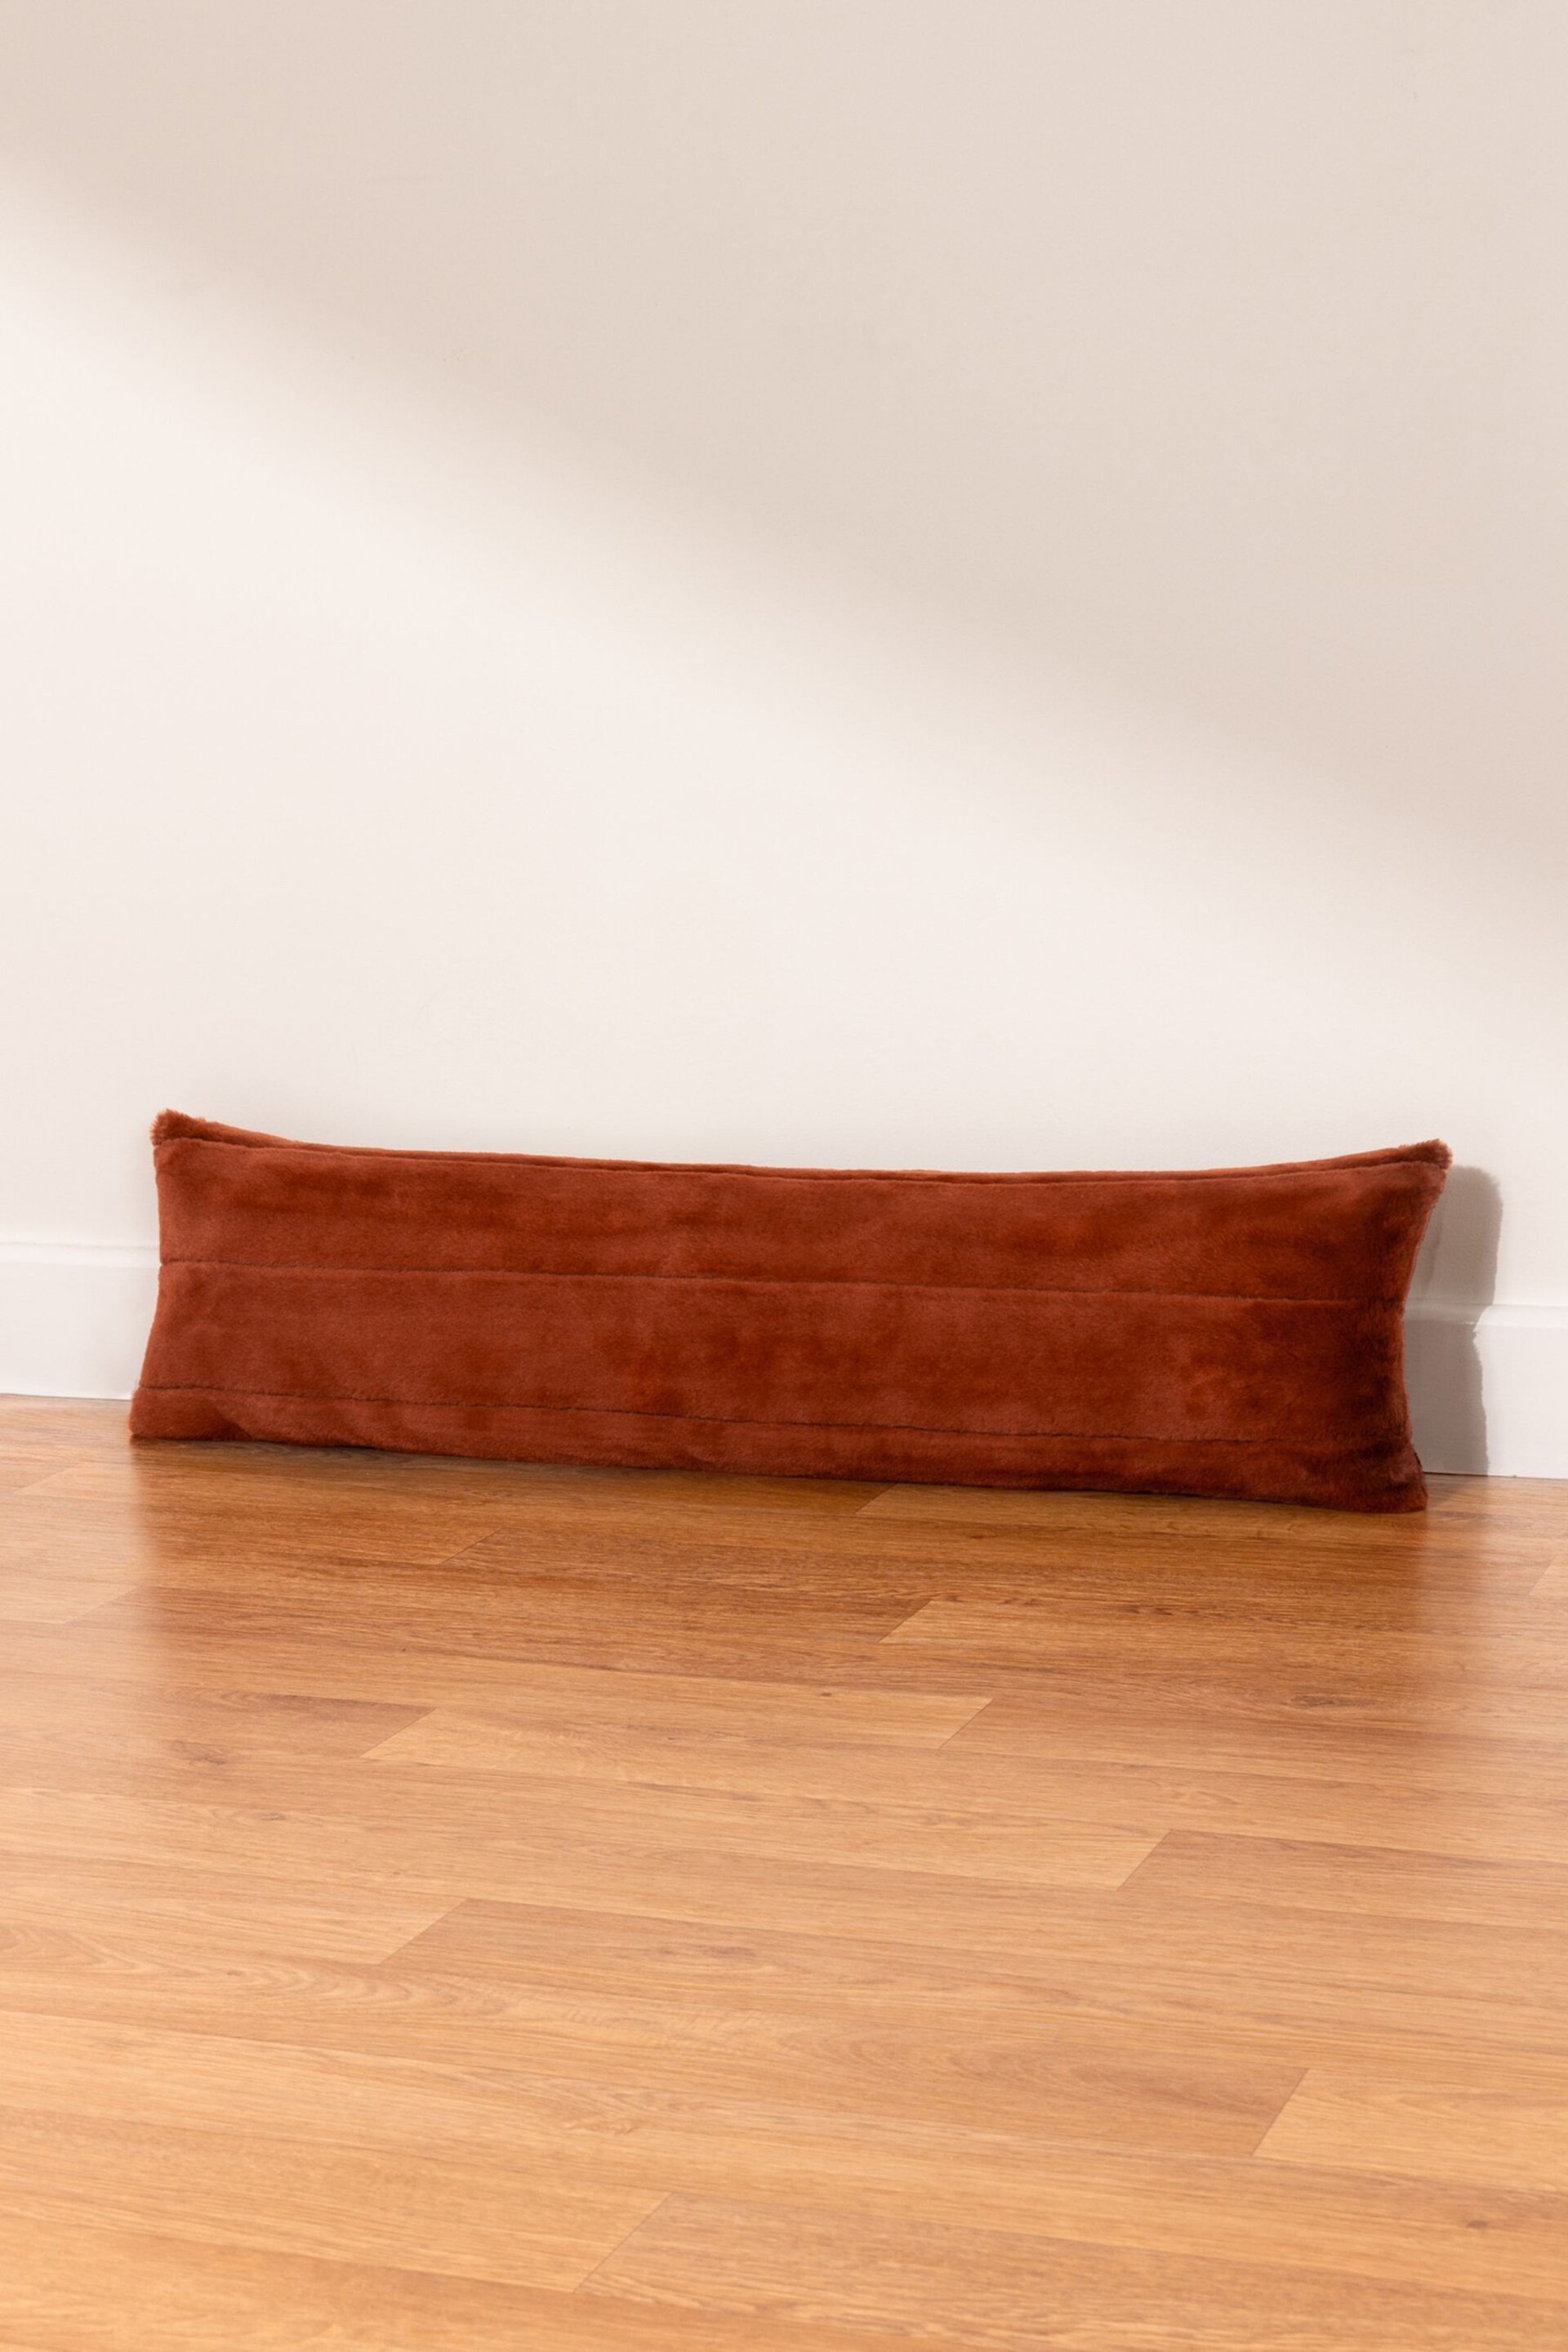 Paoletti Orange Empress Faux Fur Draught Excluder - Image 1 of 3